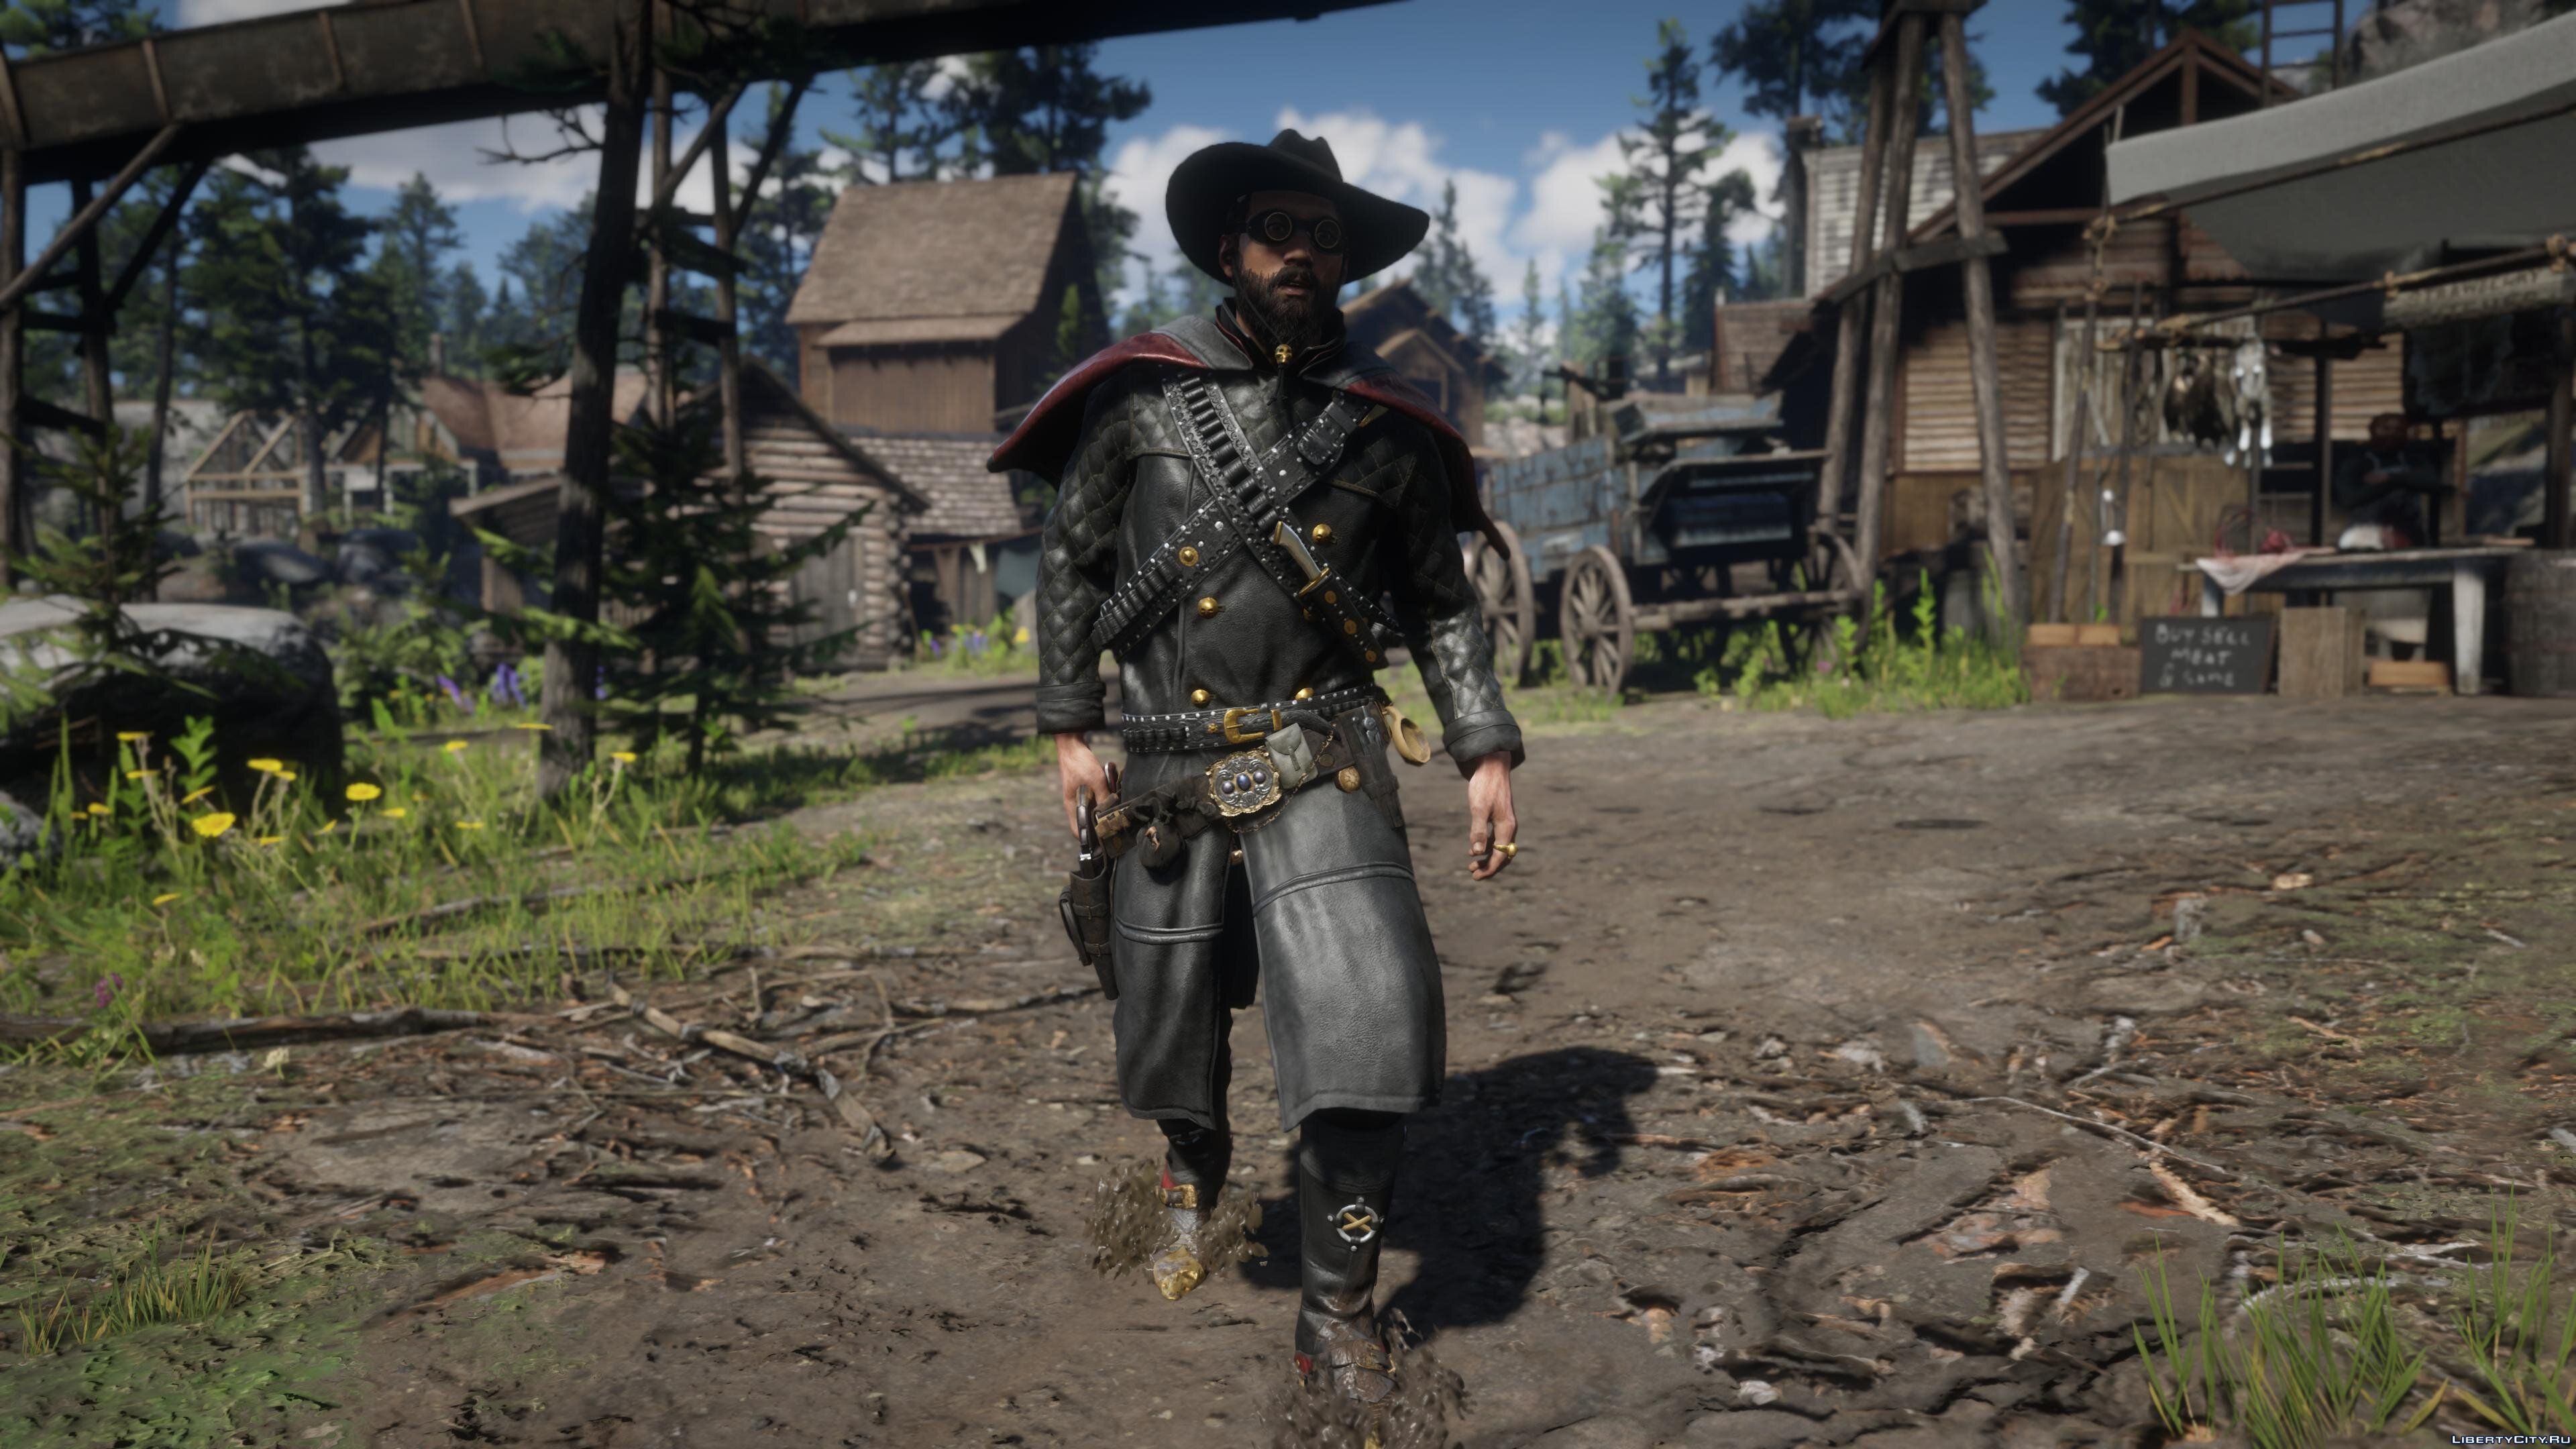 Download RDR 2 Outfit 0.3 for Red Dead 2